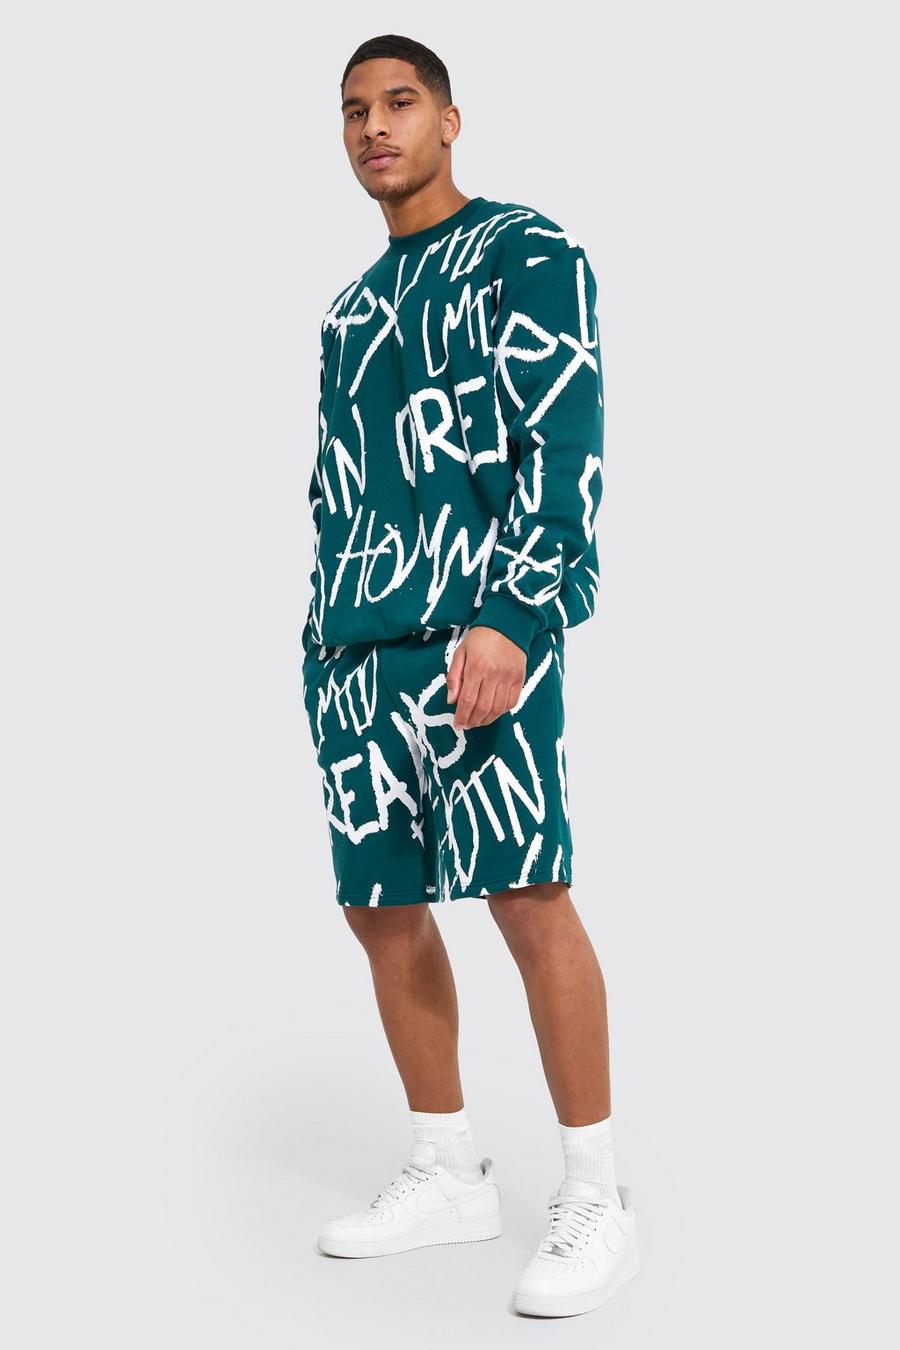 Forest green Tall All Graffiti Oversized Sweater Short Tracksuit